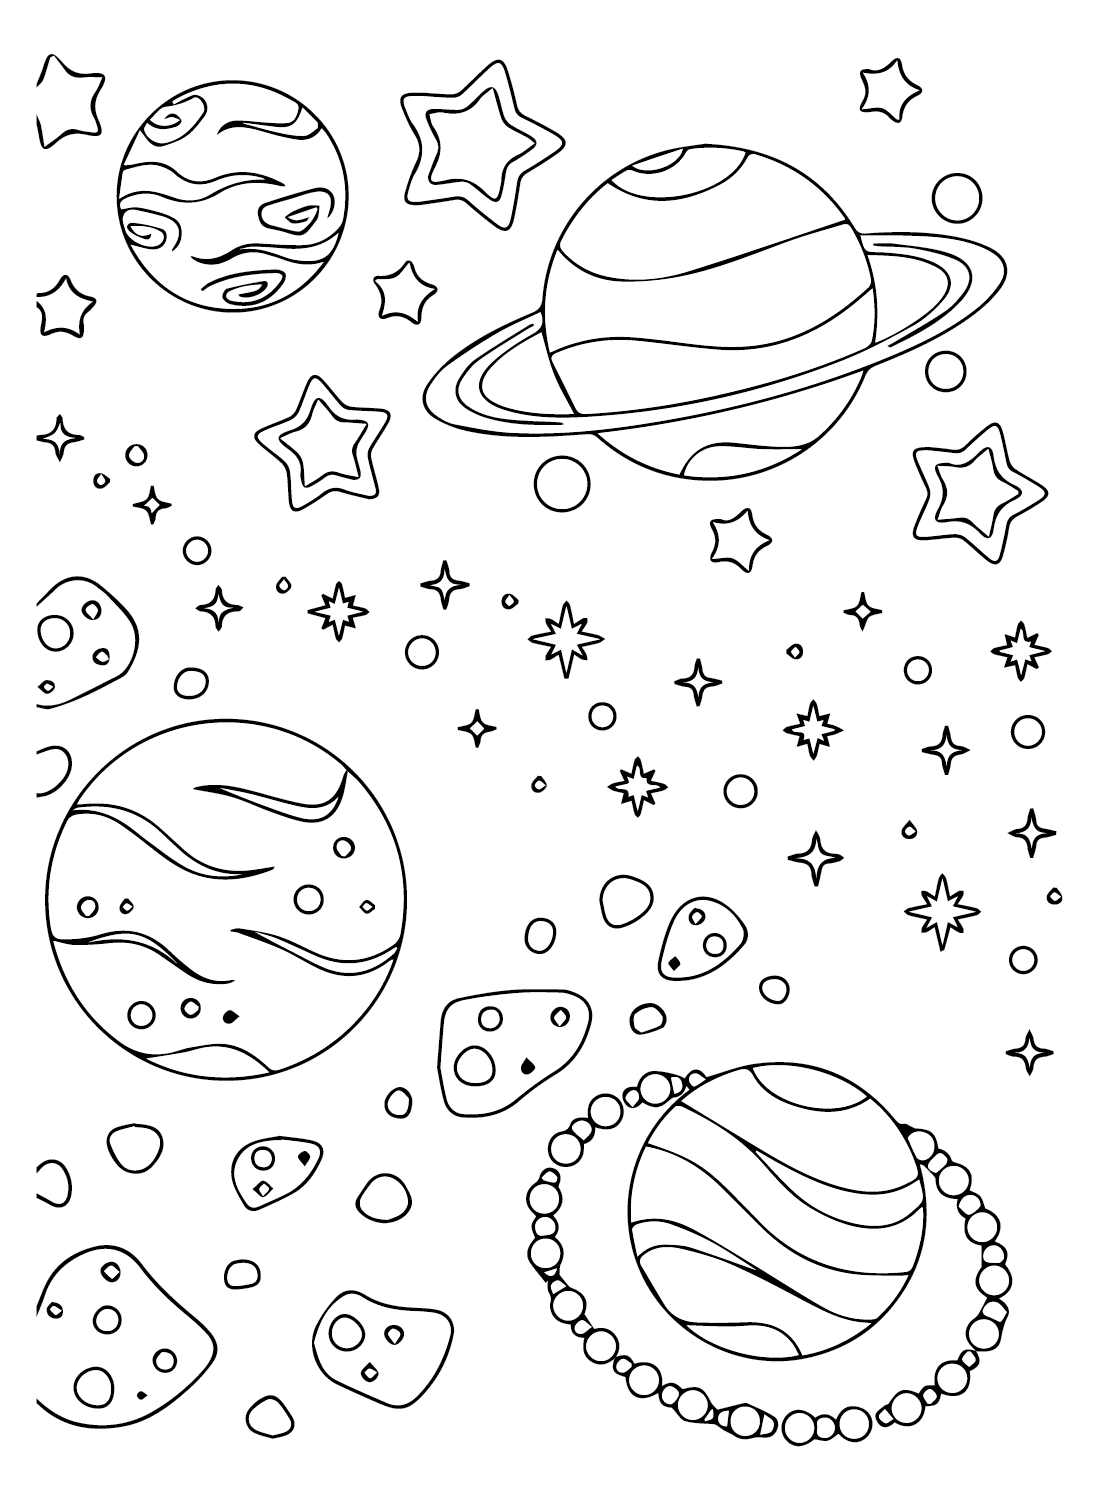 Galaxy coloring pages printable for free download